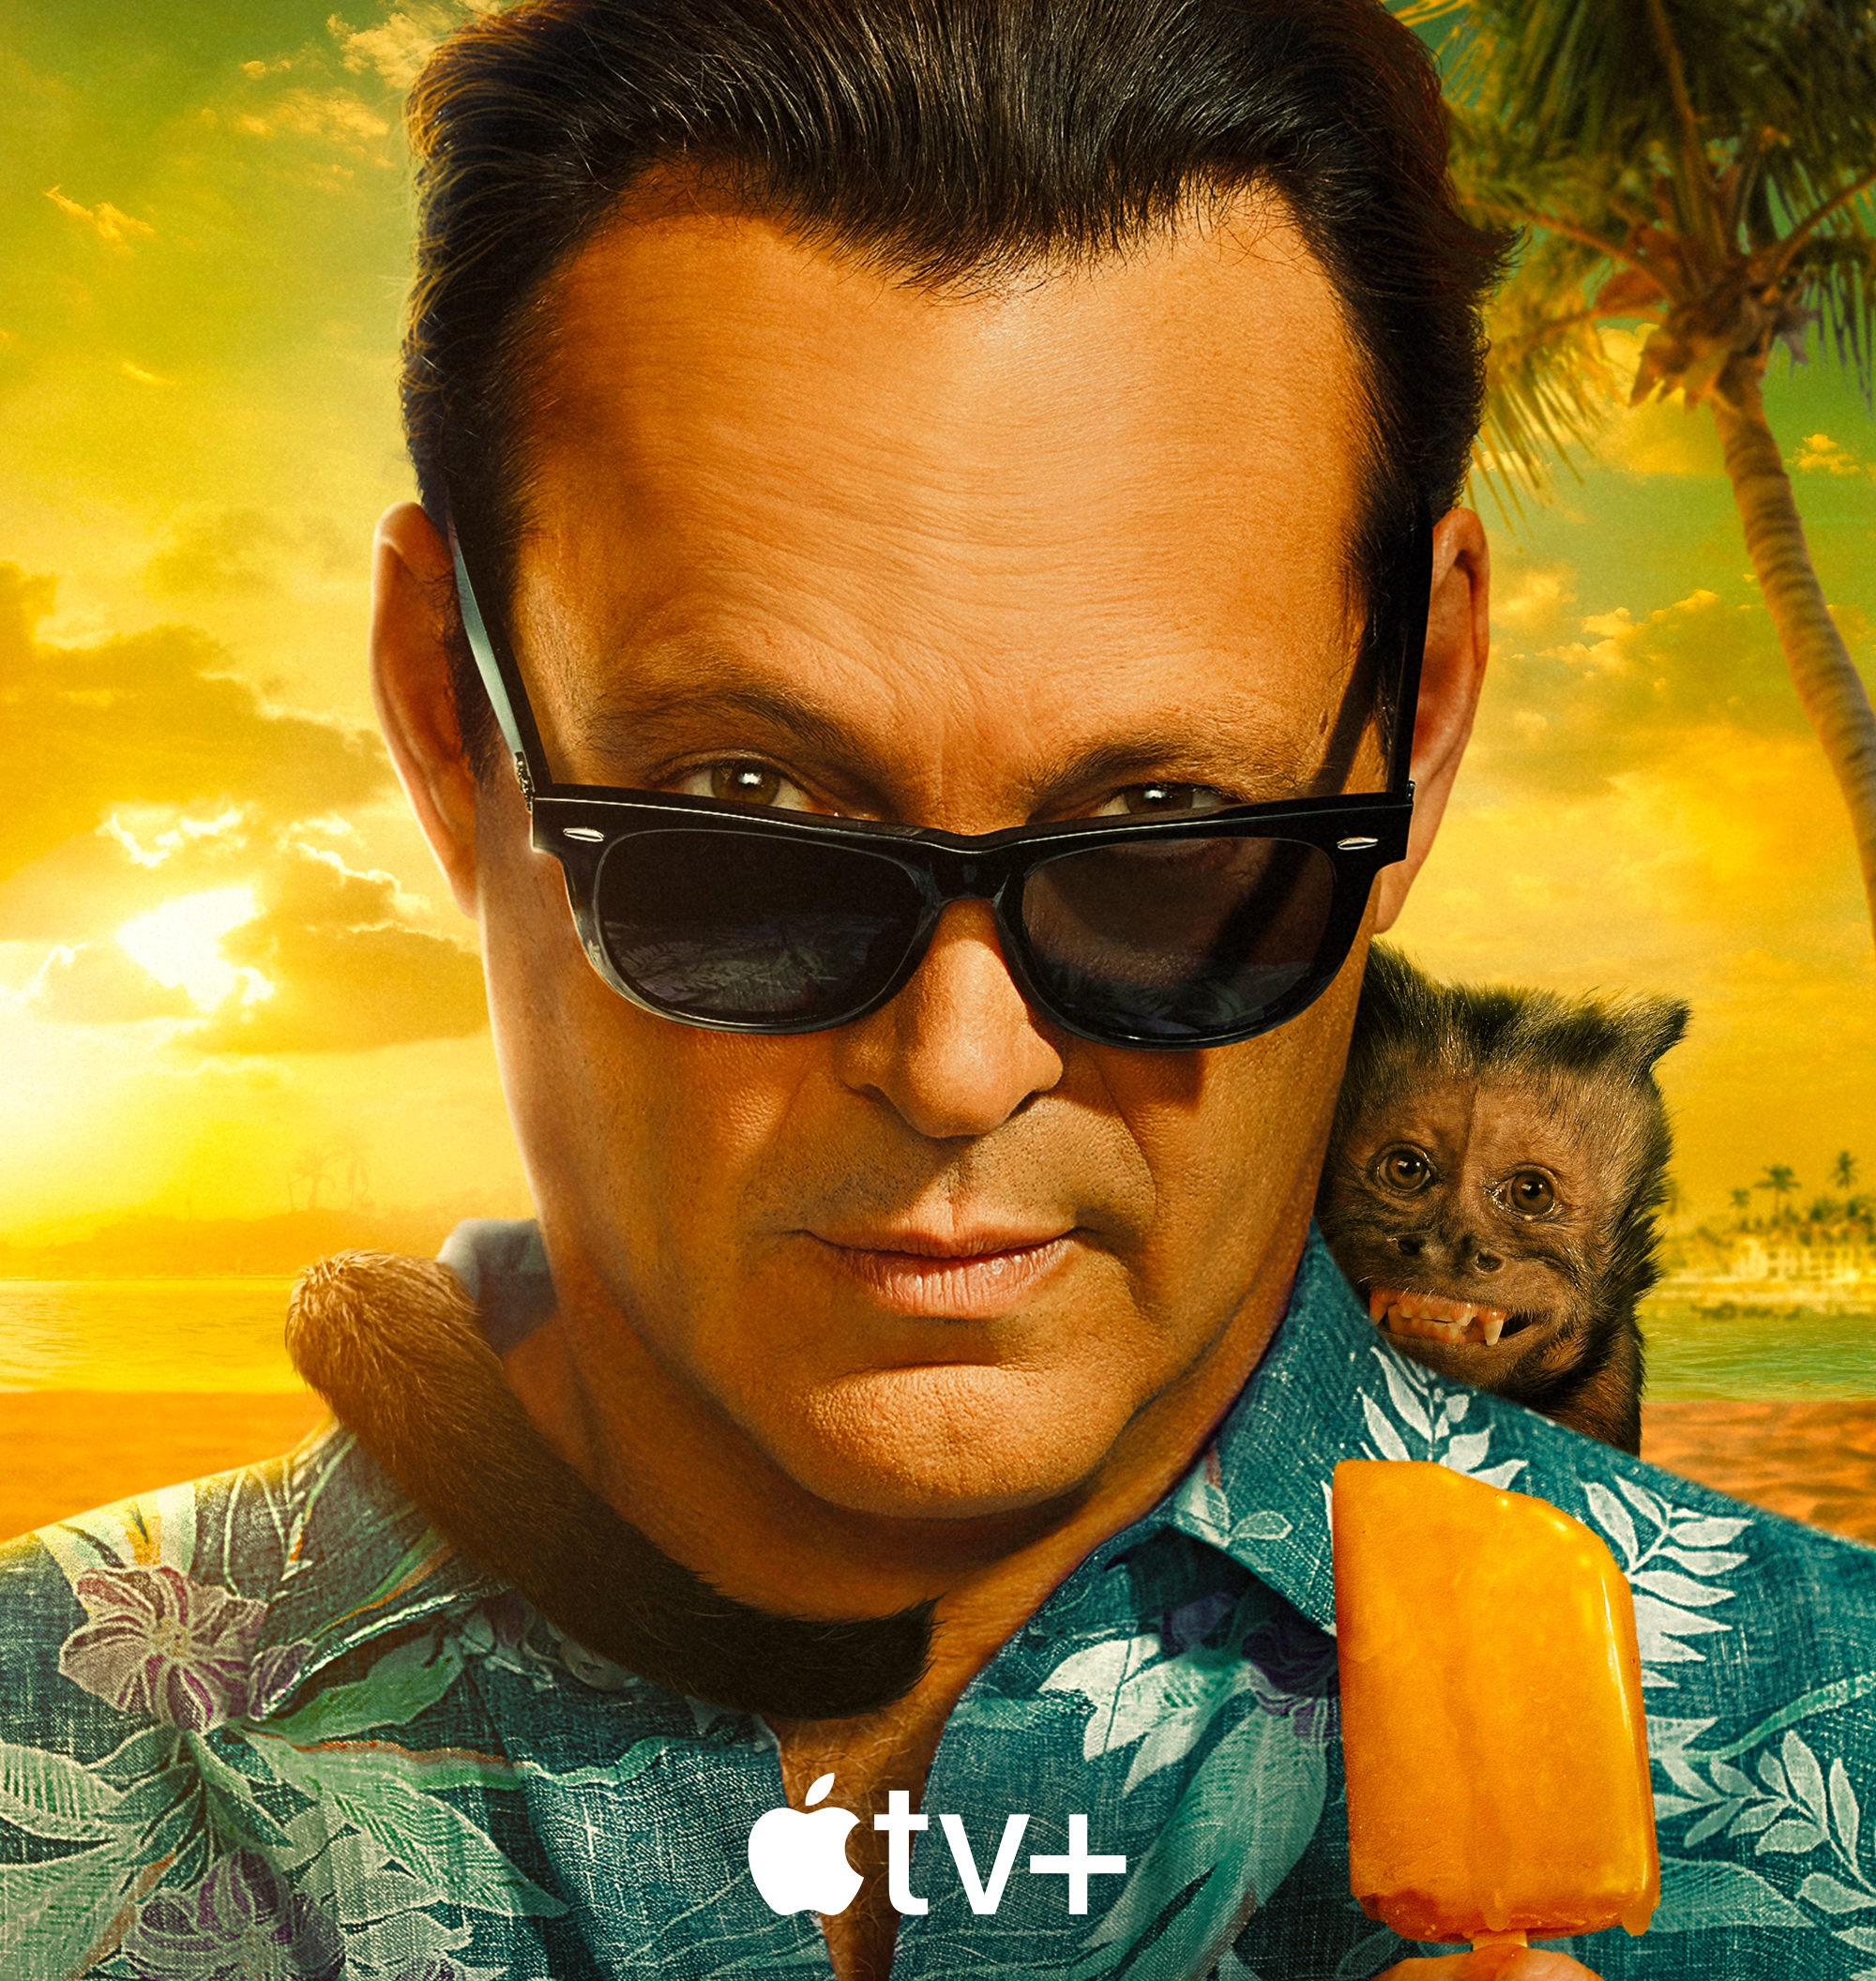 Apple TV+ debuts trailer for comedy “Bad Monkey,” starring and executive produced by Vince Vaughn